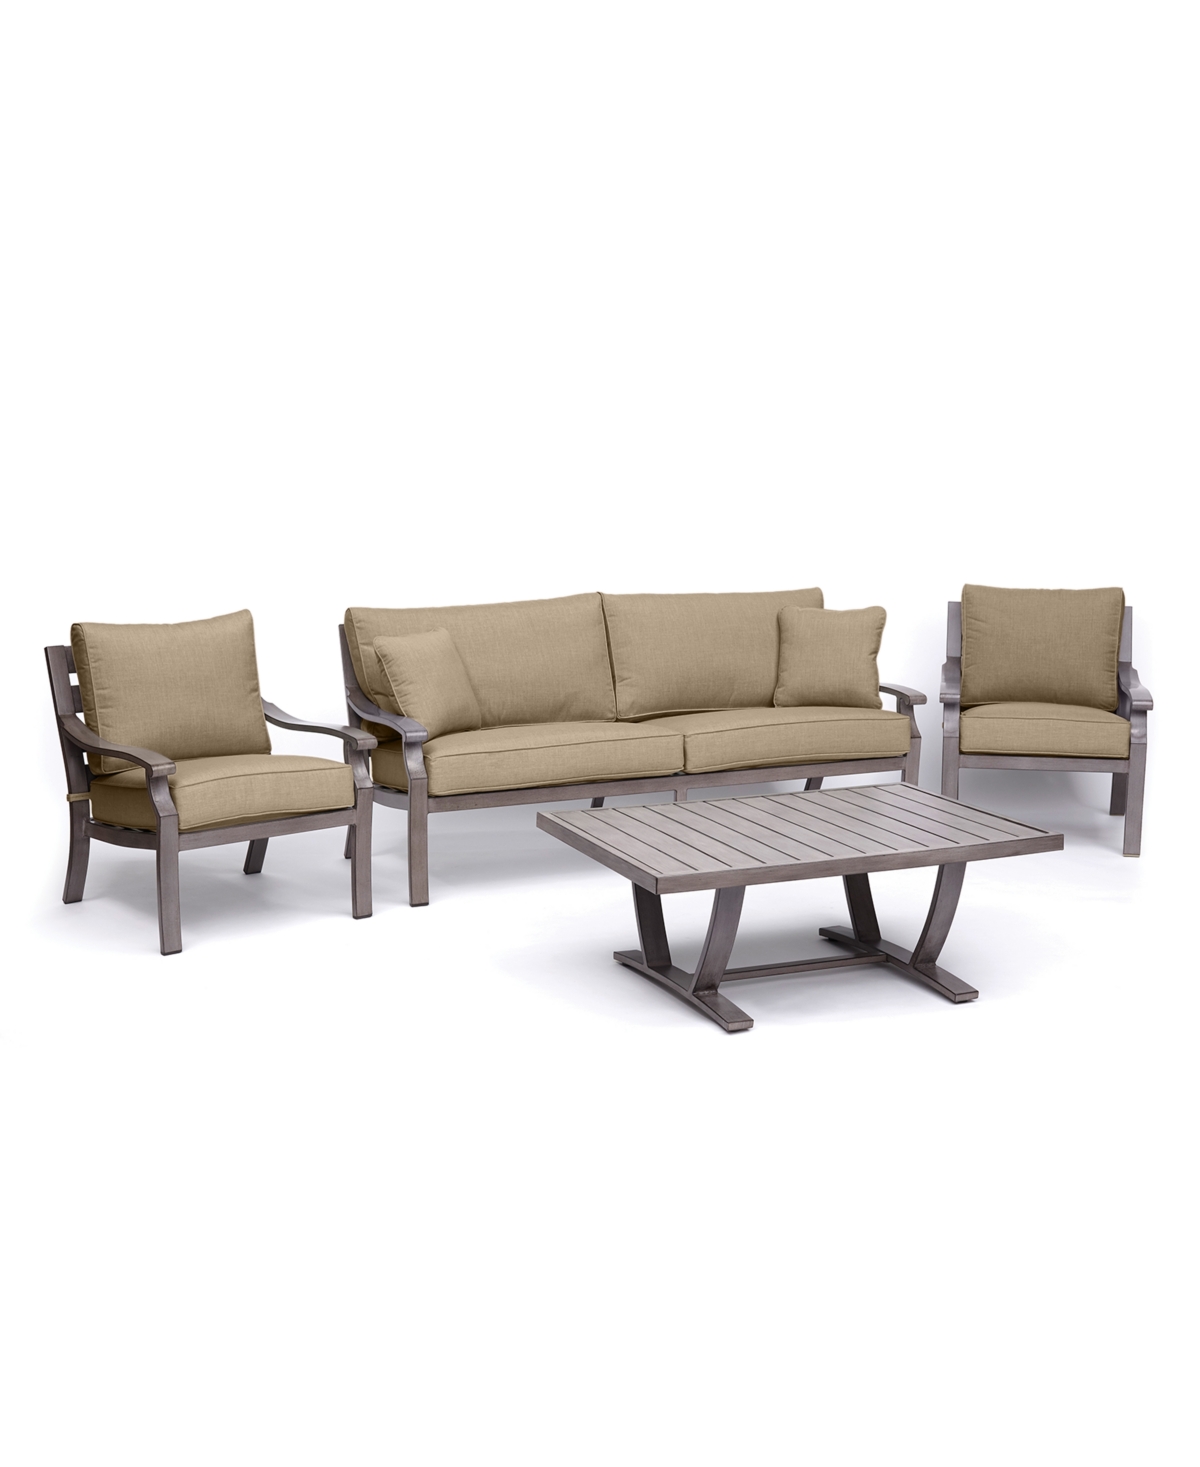 Agio Tara Aluminum Outdoor 4-pc. Seating Set (1 Sofa, 2 Club Chairs & 1 Coffee Table), Created For Macy's In Outdura Remy Pebble